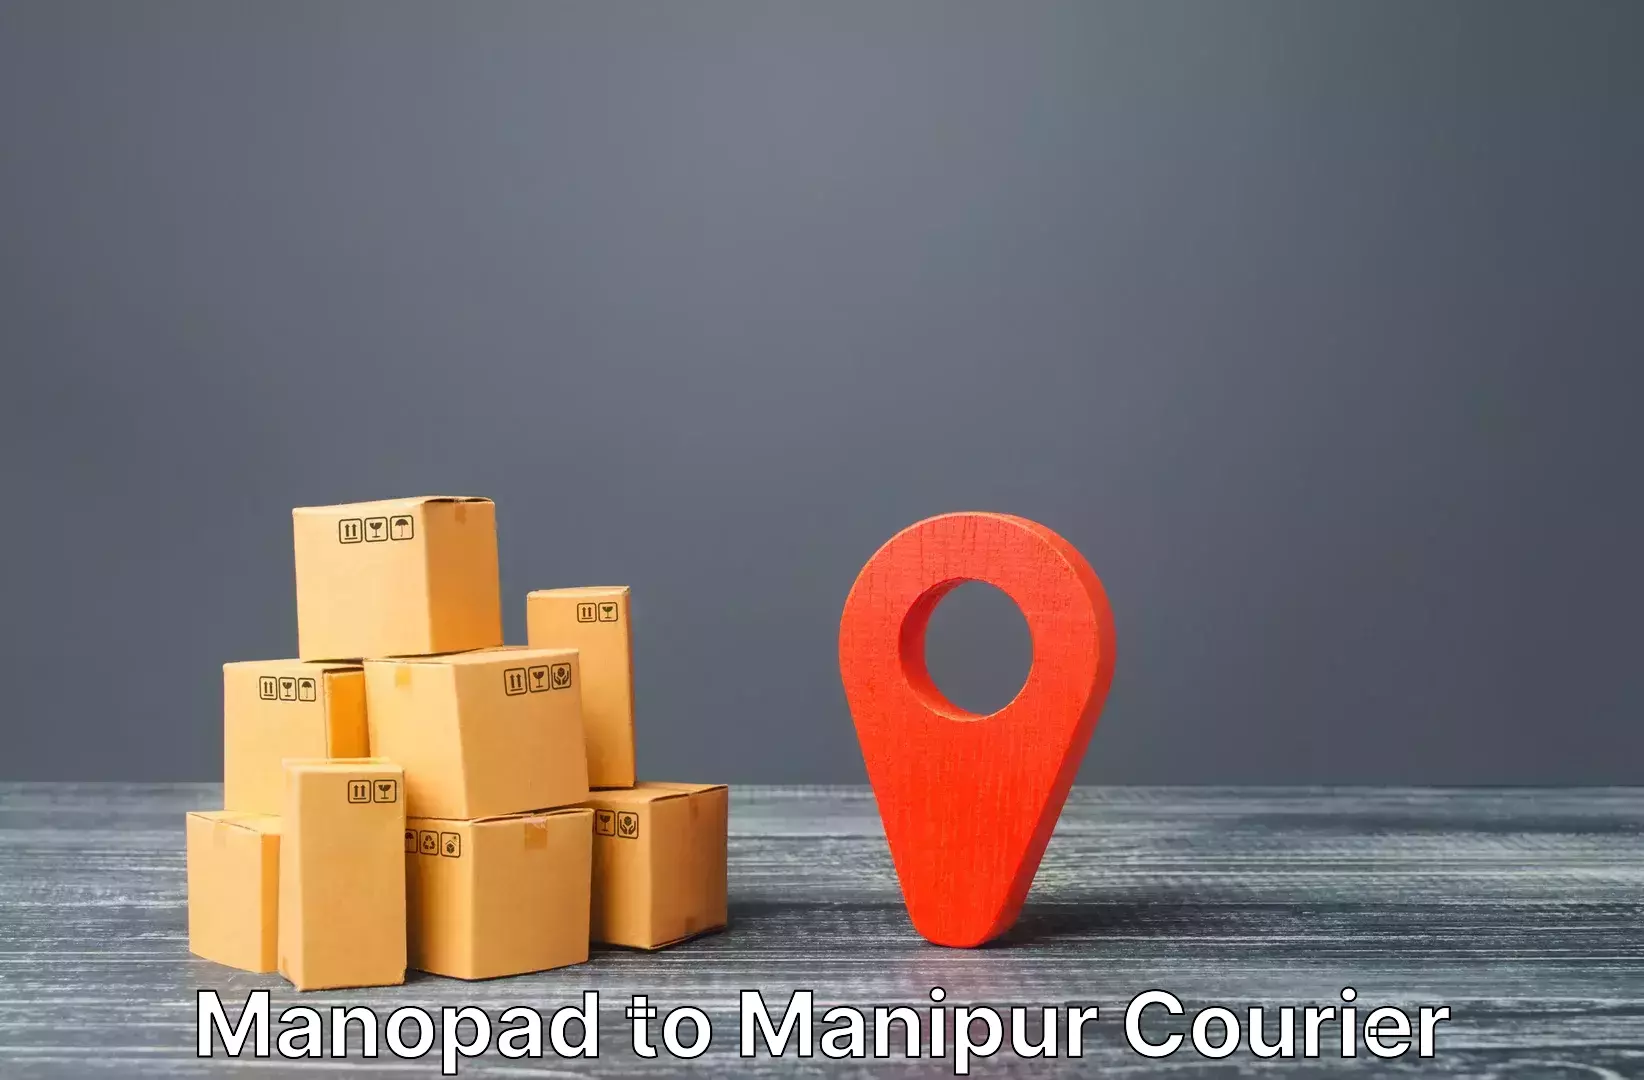 Door to hotel baggage transport in Manopad to Manipur